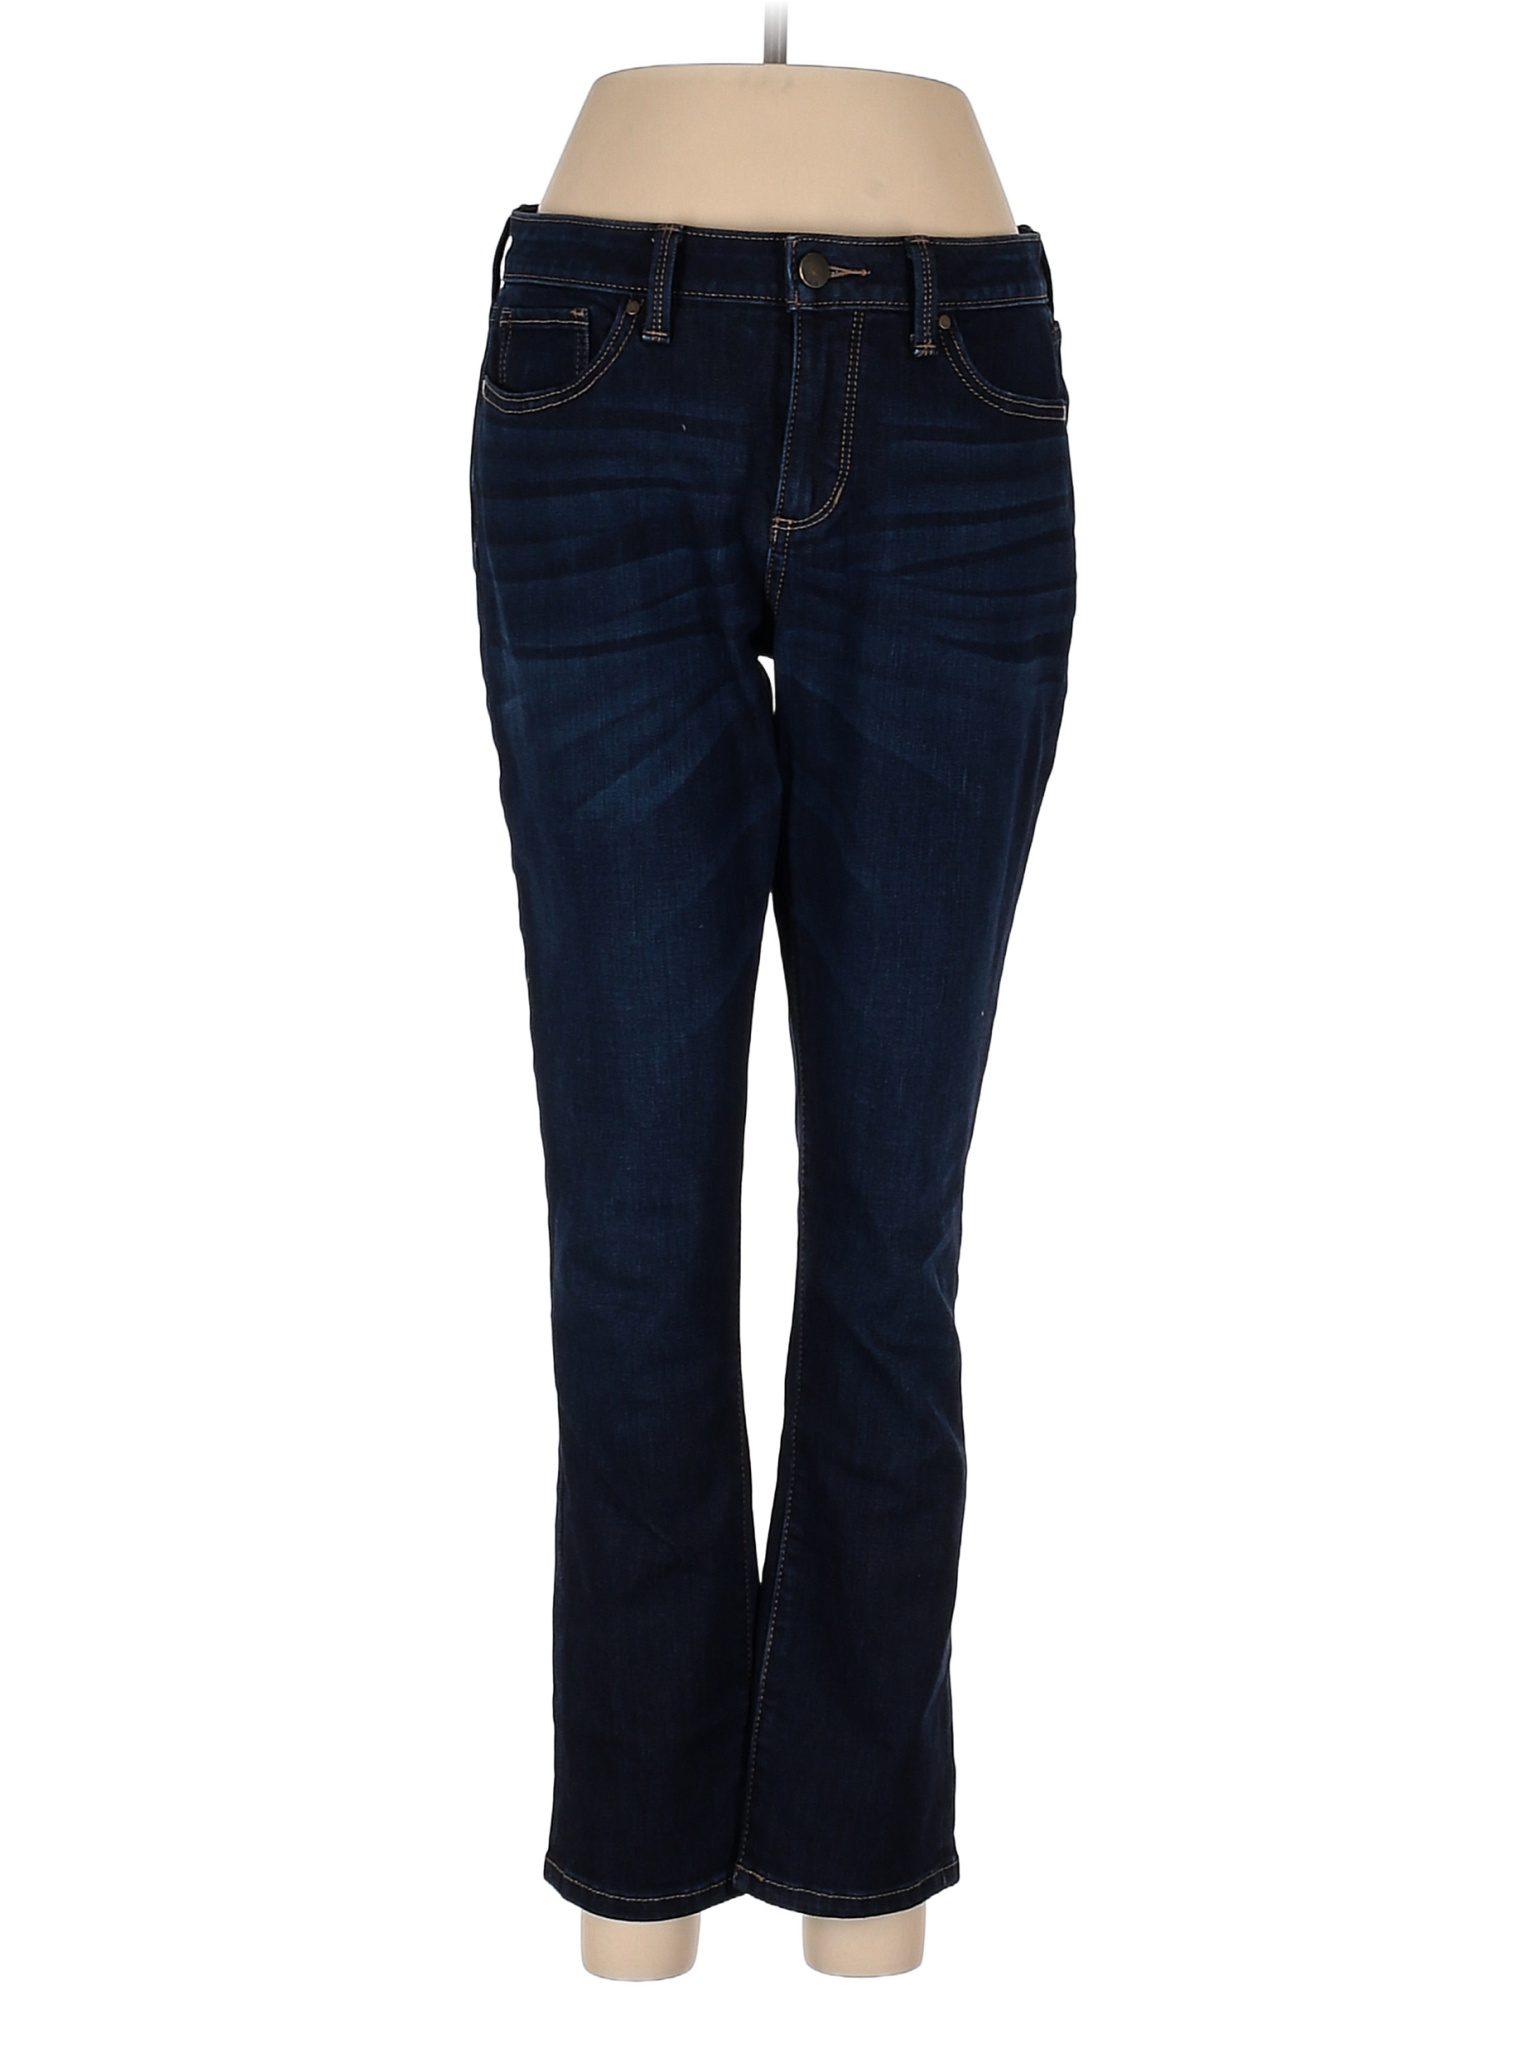 a.n.a. A New Approach Solid Blue Jeans Size 6 - 62% off | thredUP